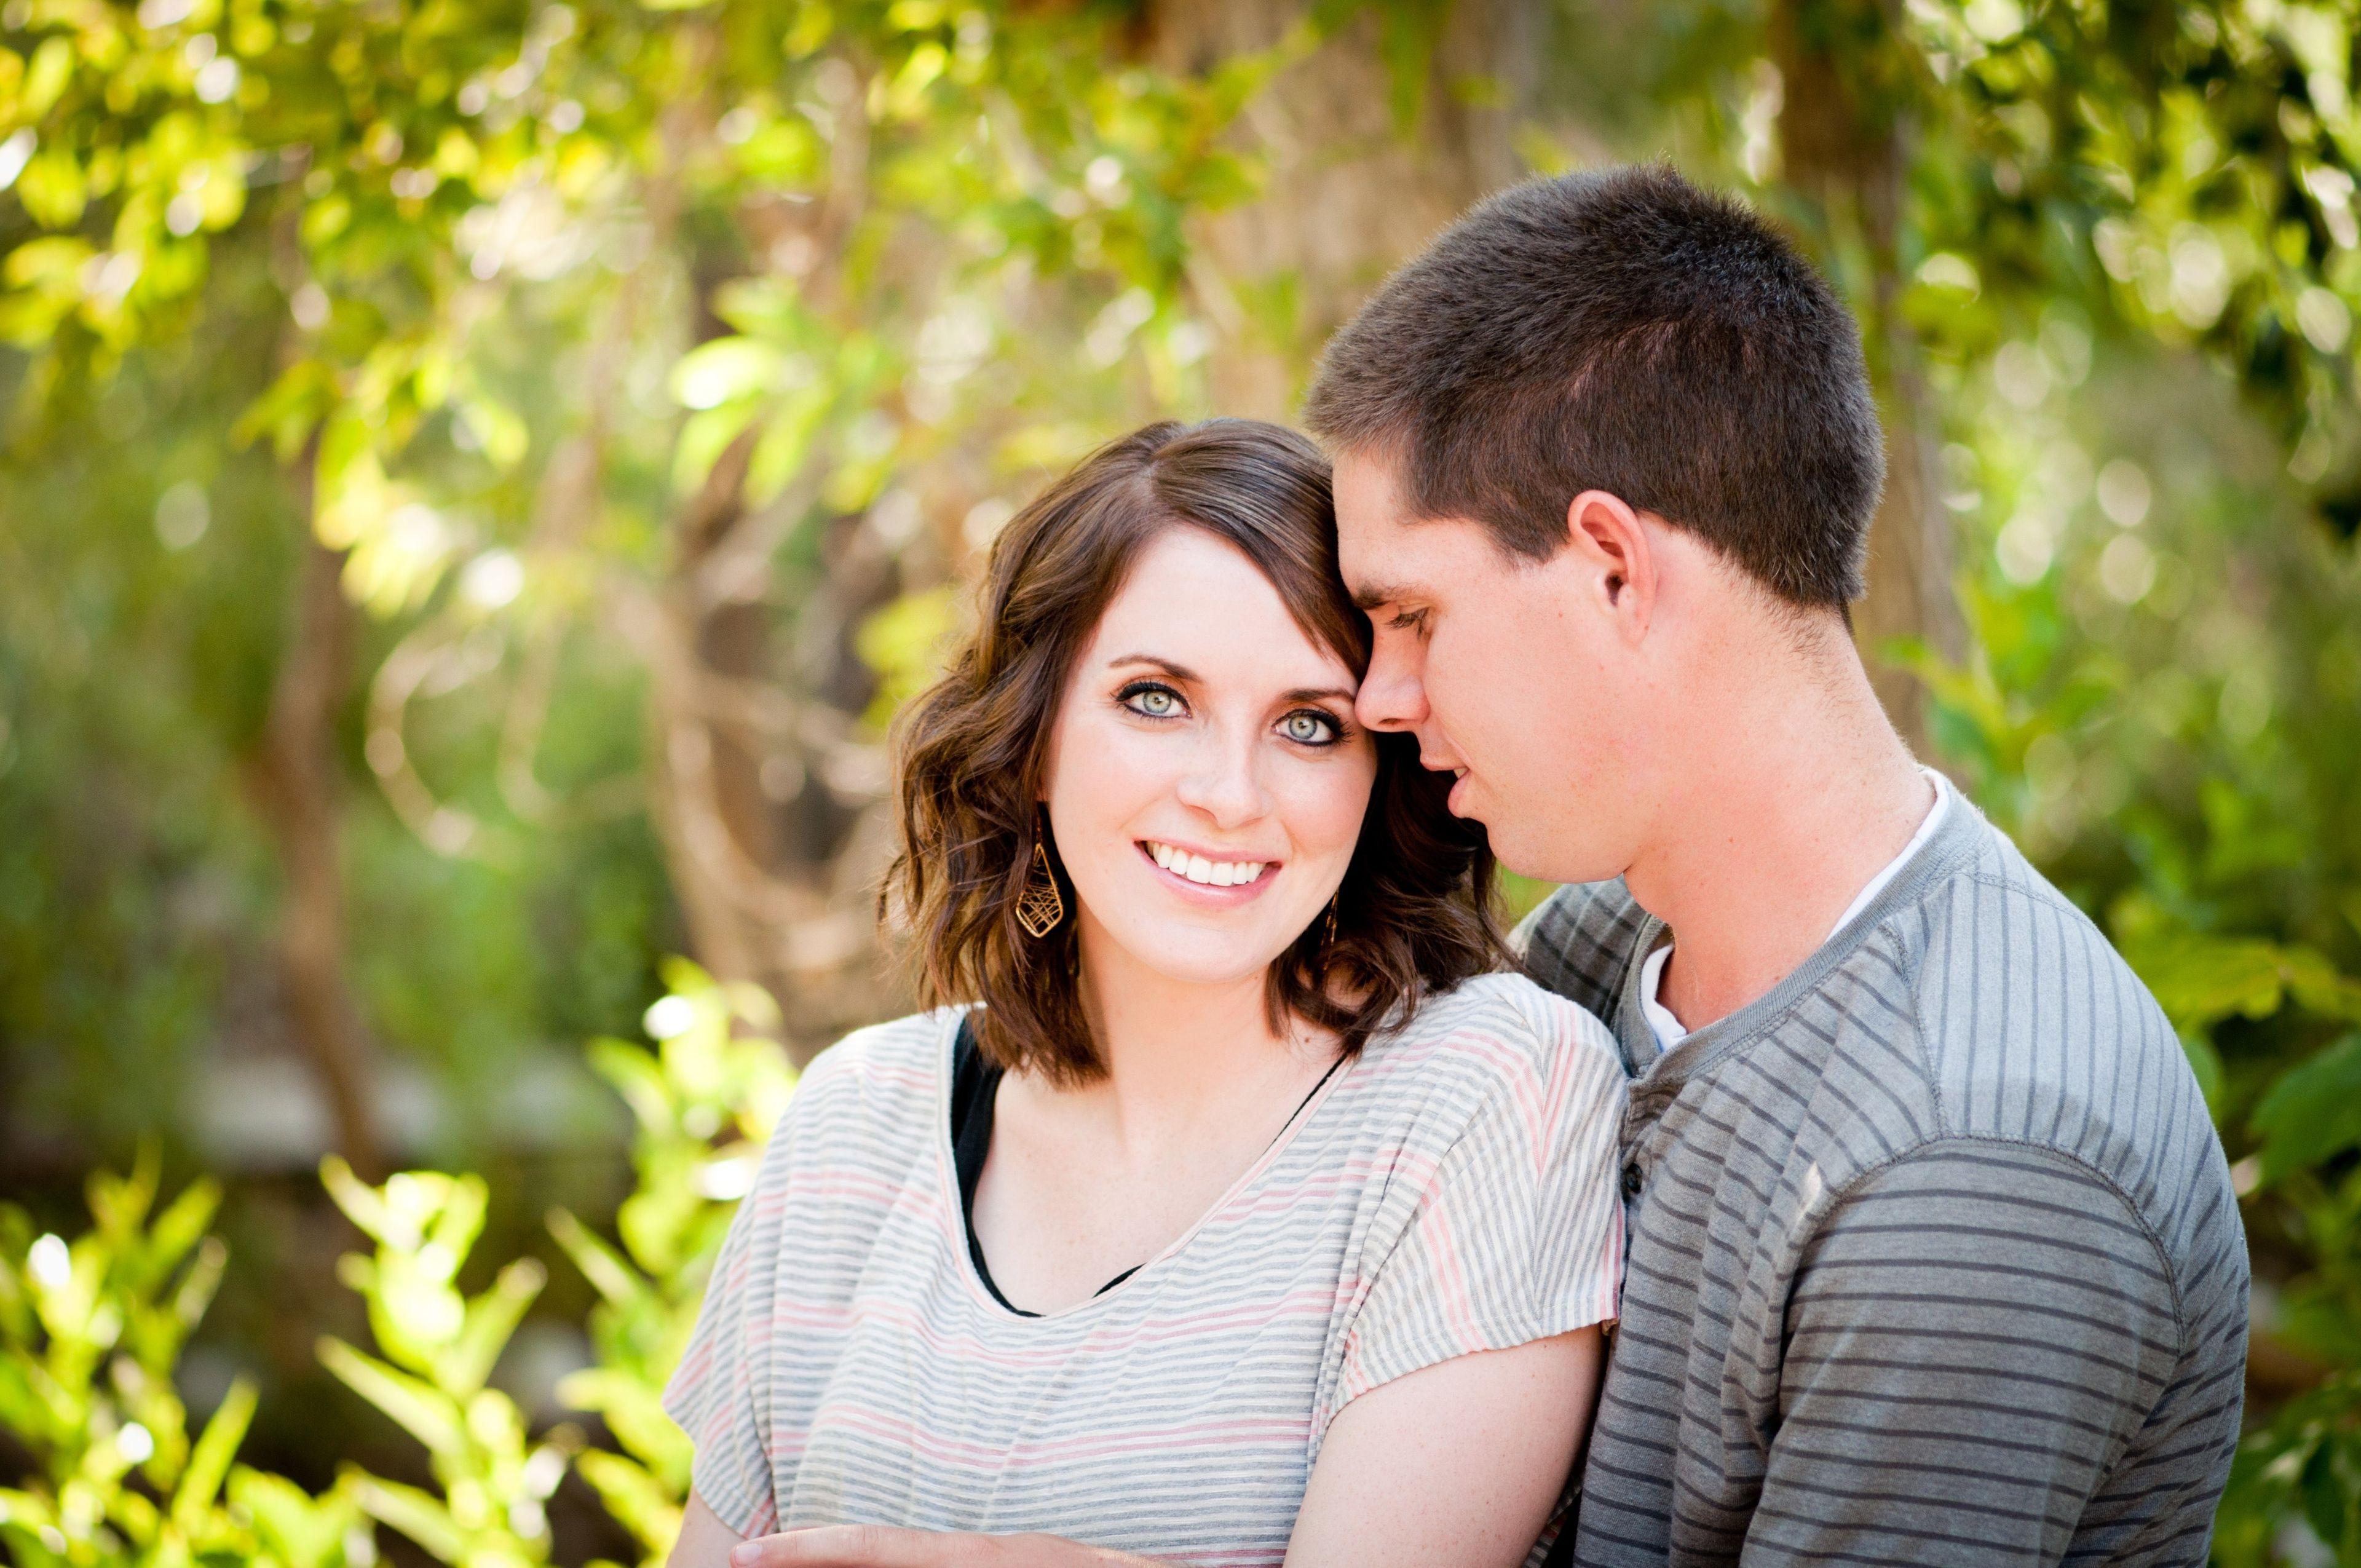 An engagement picture of a young couple outside.